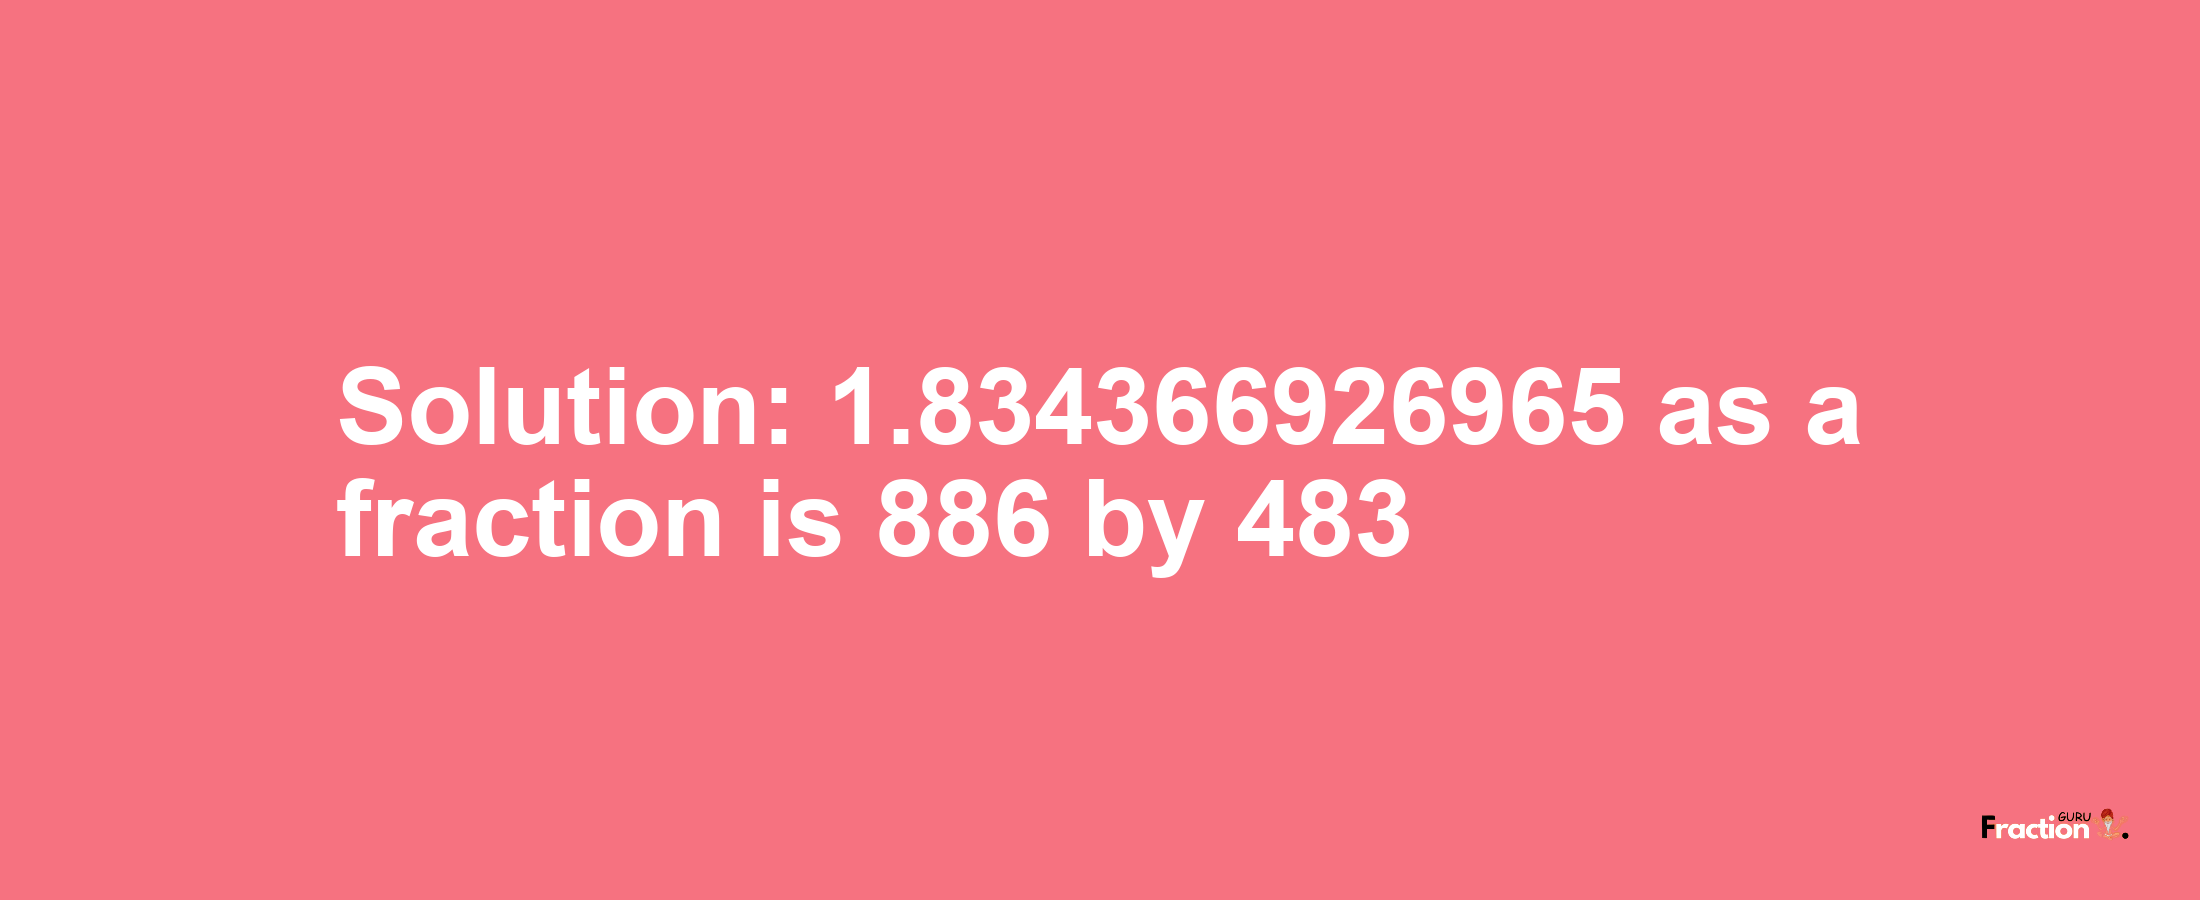 Solution:1.834366926965 as a fraction is 886/483